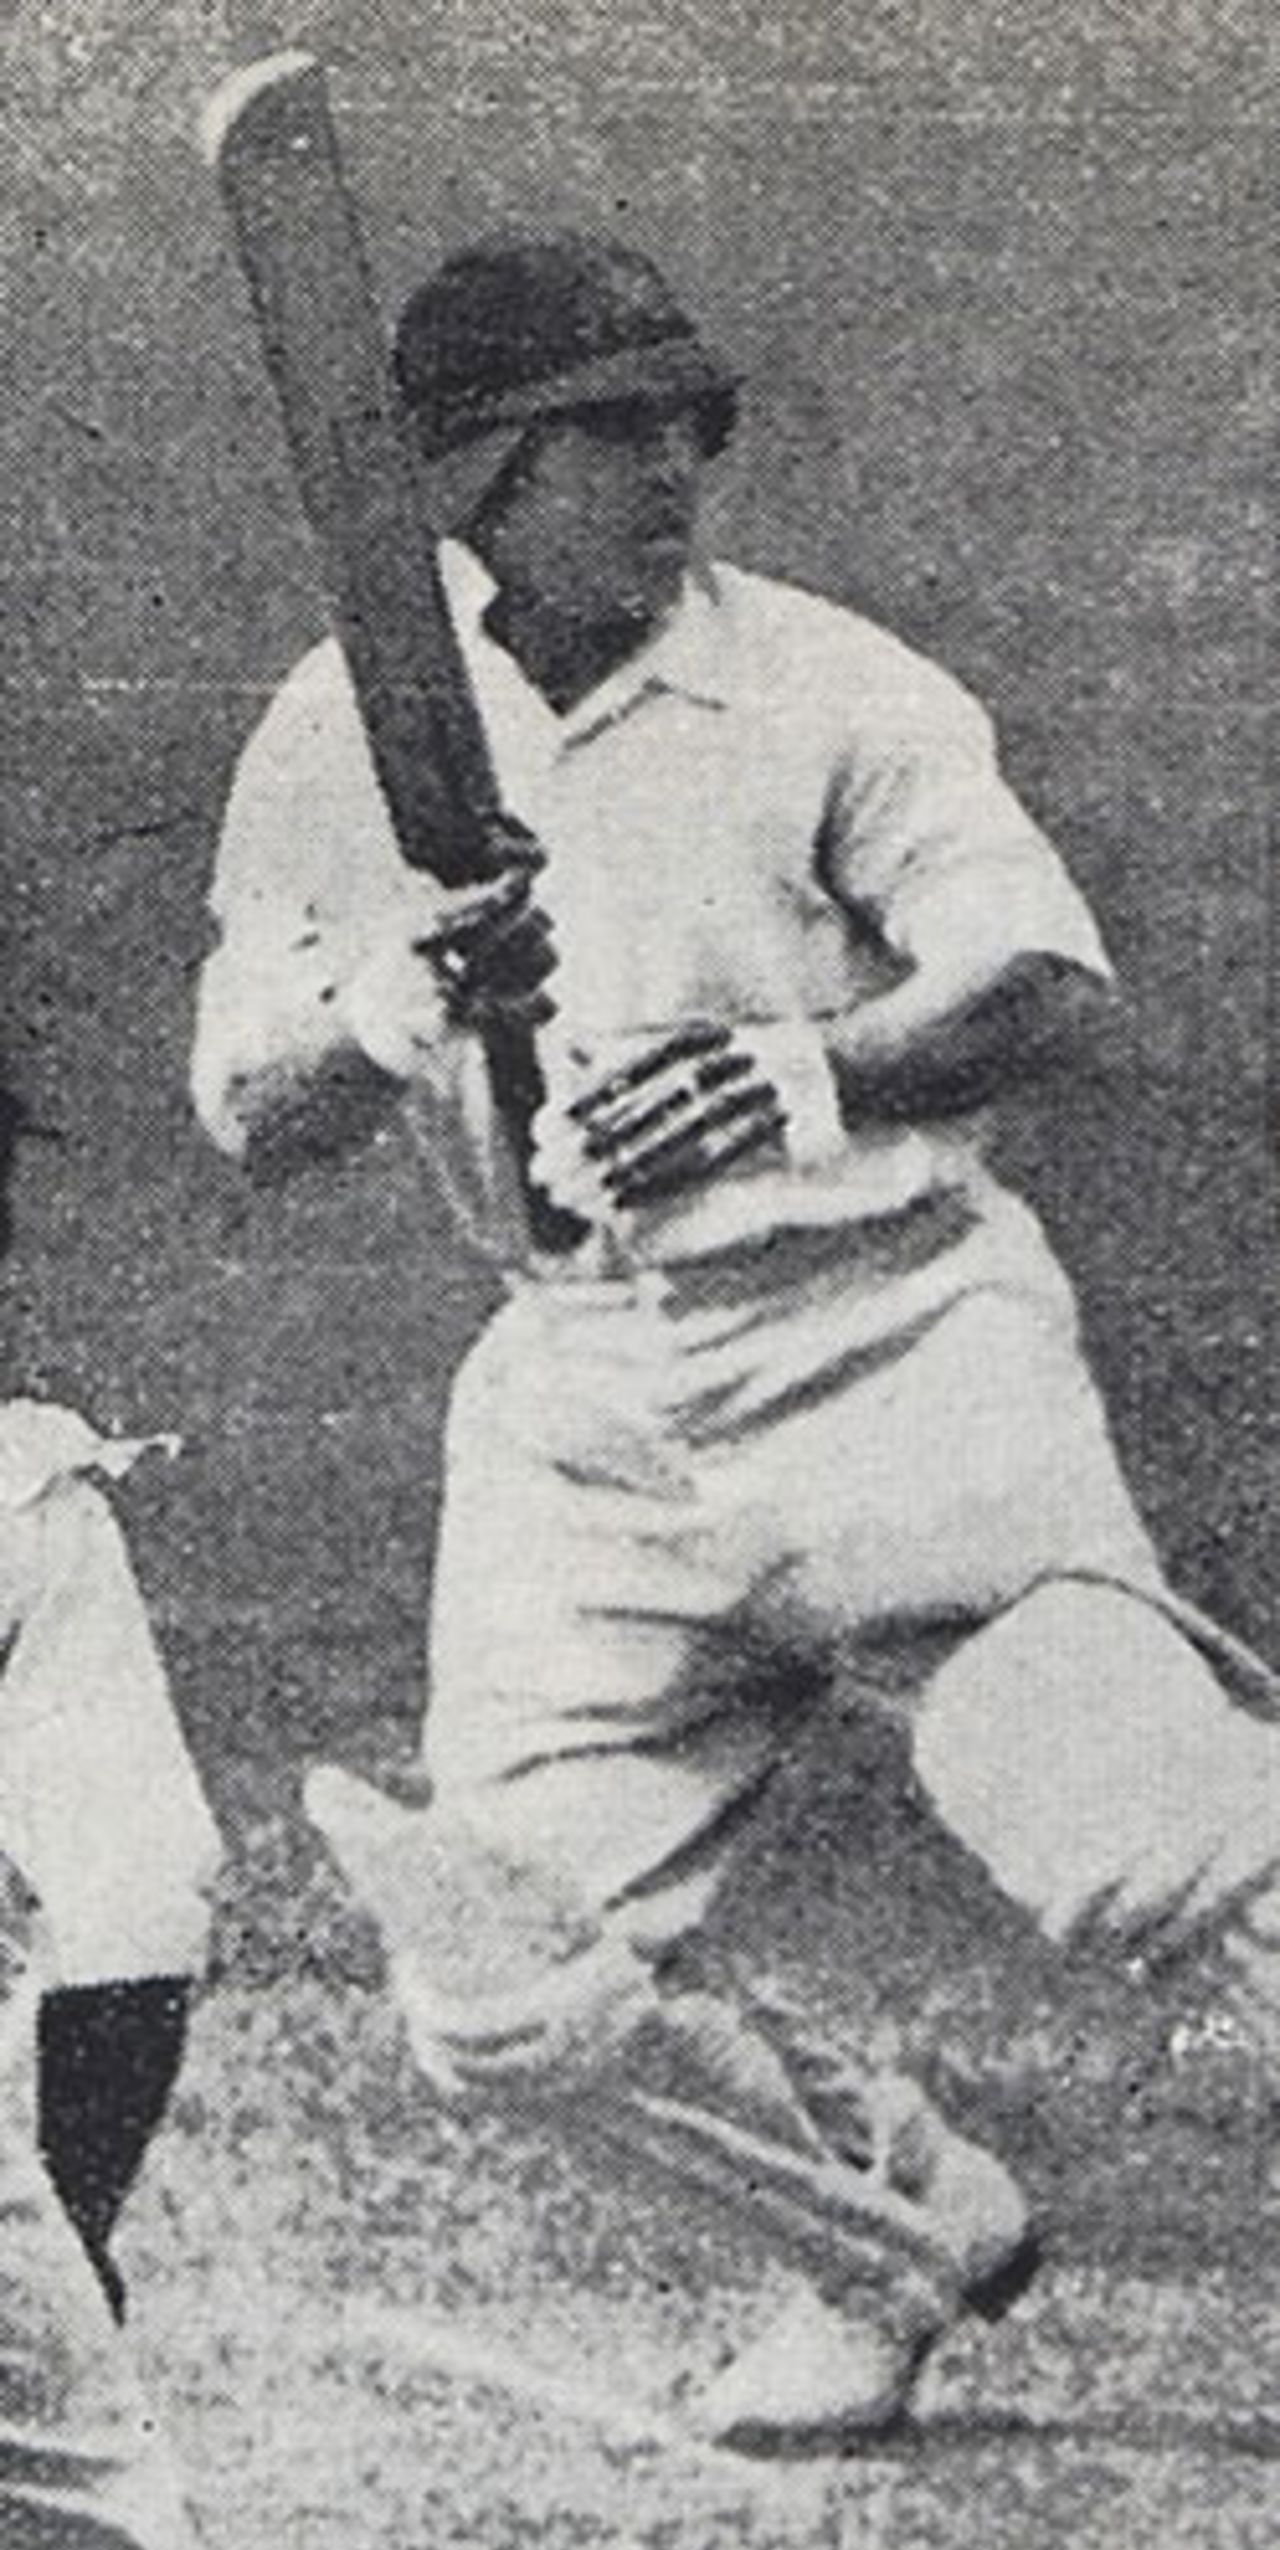 Patsy Hendren batting in a makeshift helmet, MCC v West Indians, Lord's, May 23, 1933